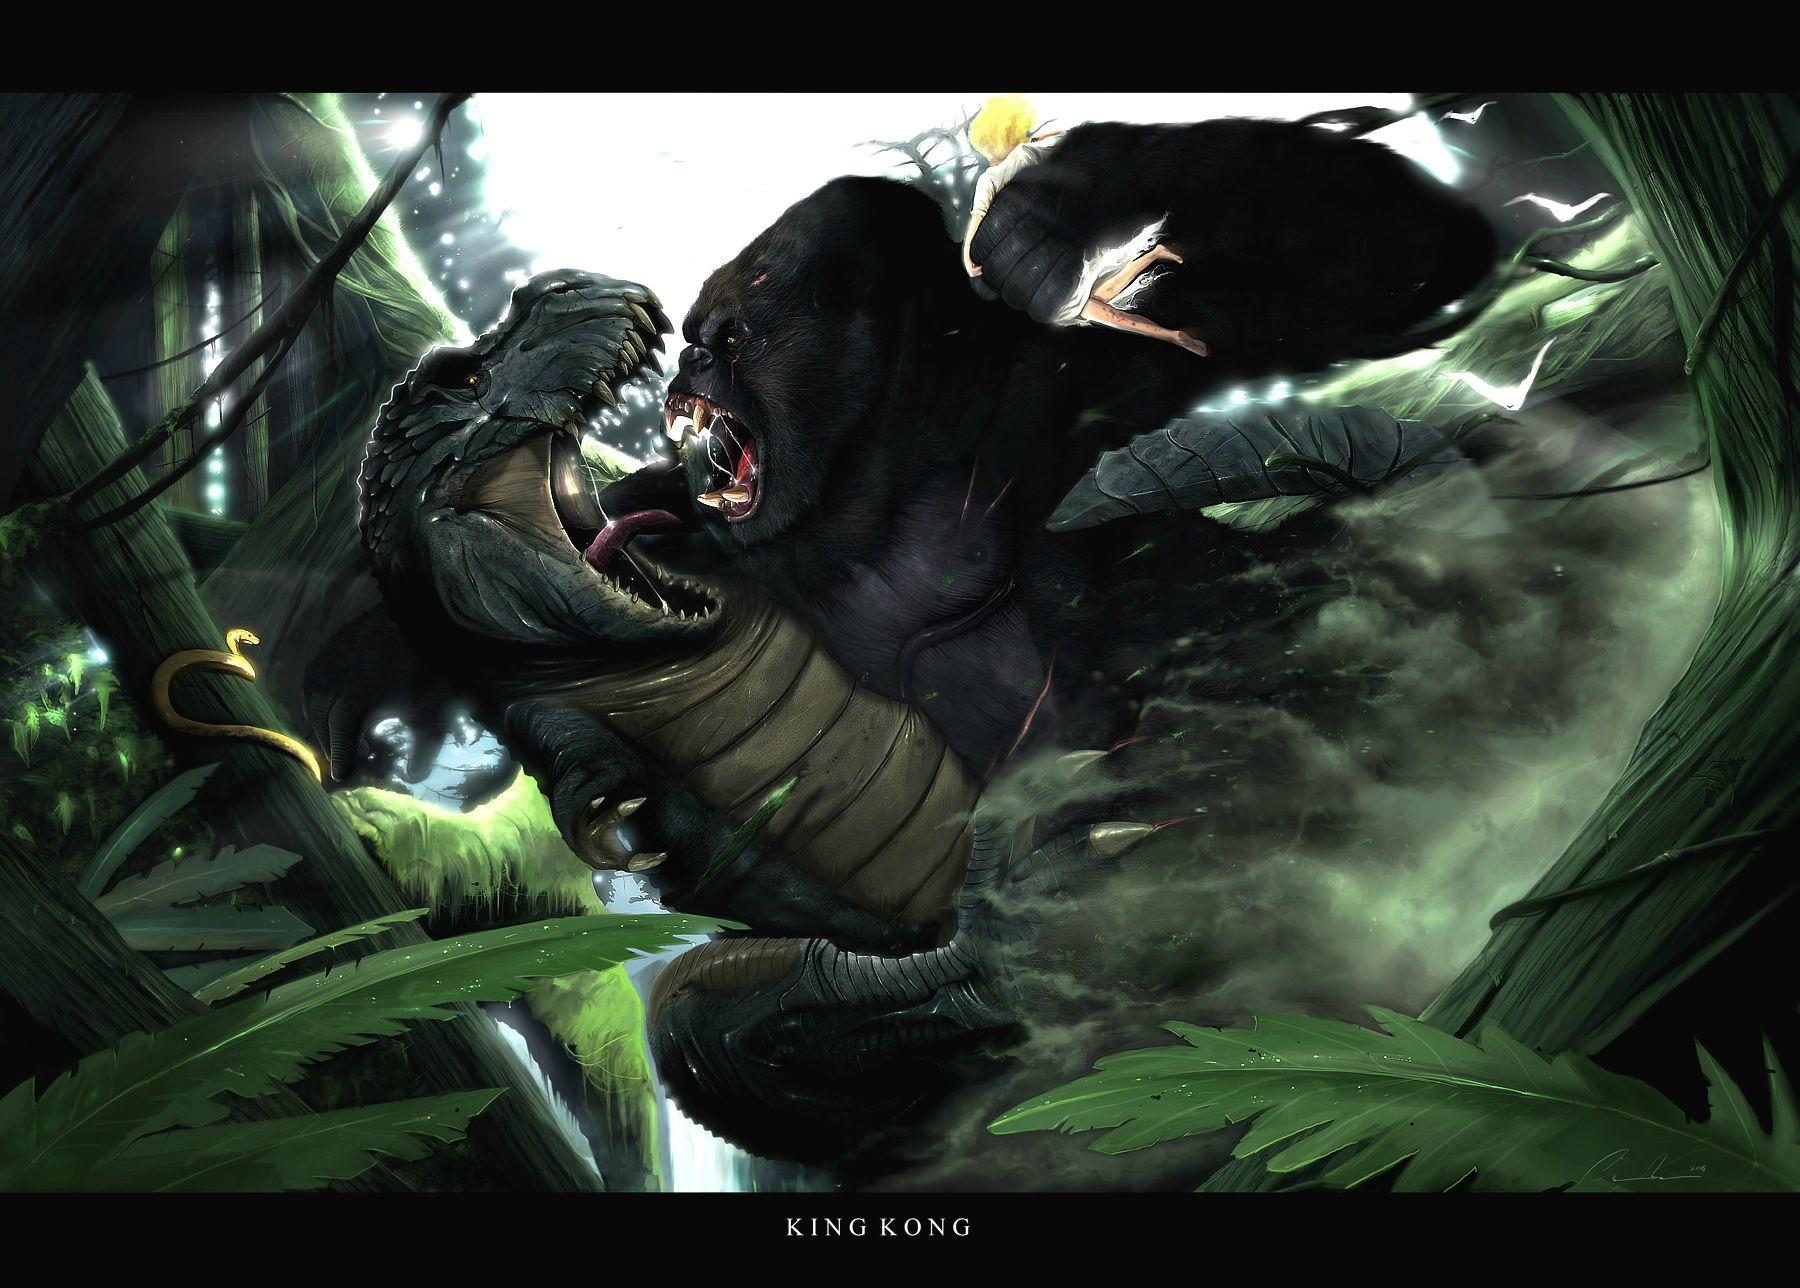 King Kong (2005) Wallpaper and Background Imagex1288